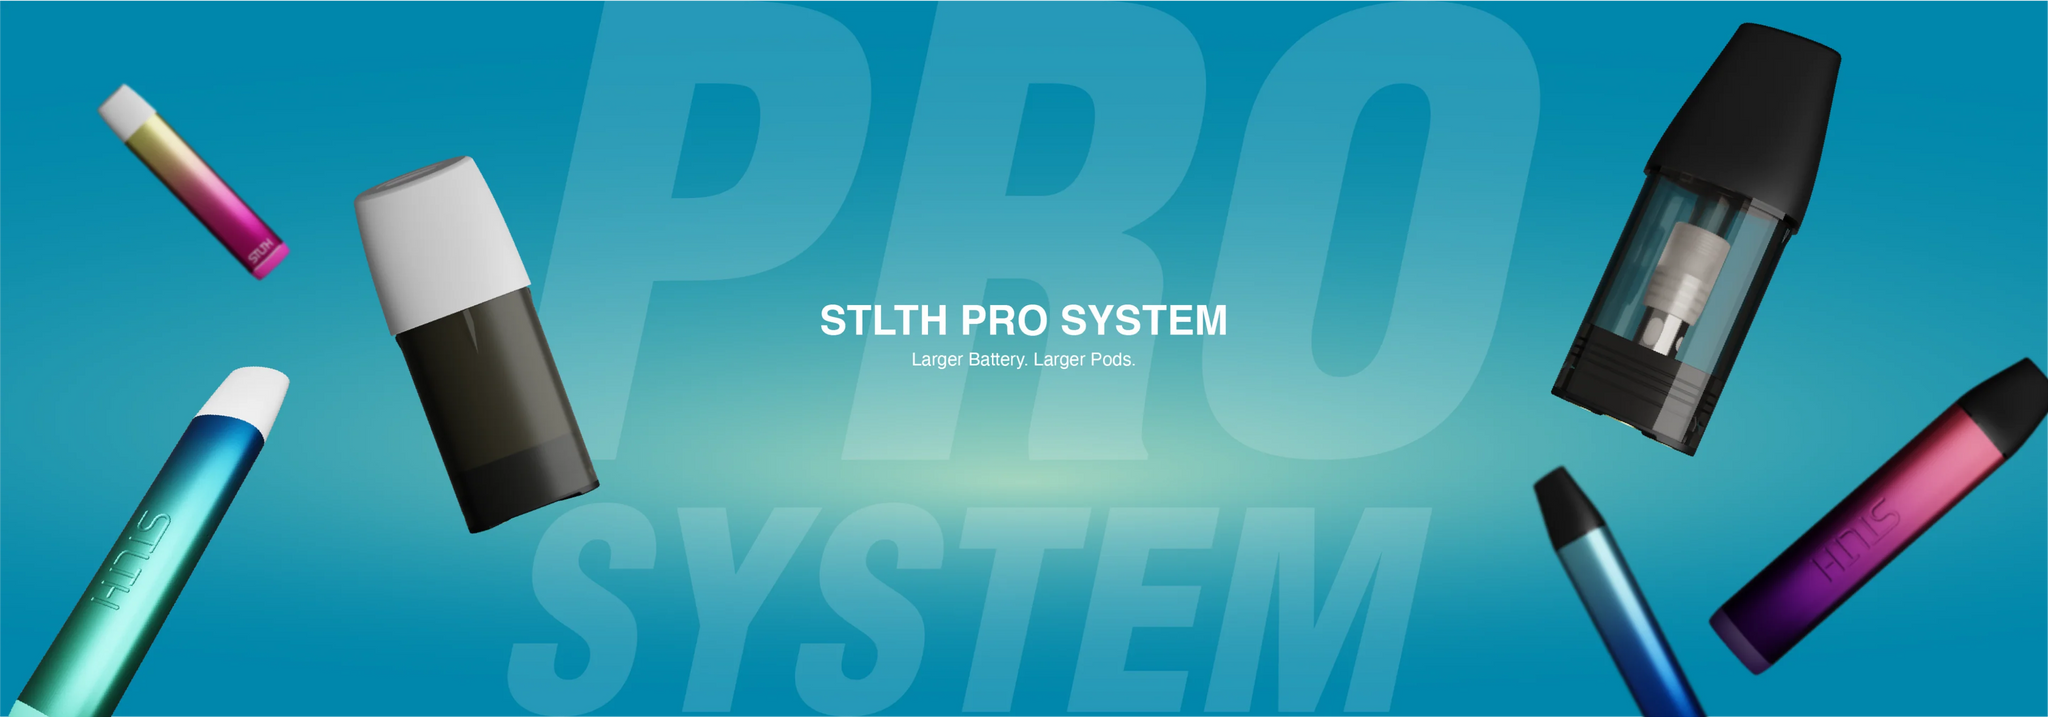 STLTH Pro X Pods - Canada and Quebec Free Vape Shipping